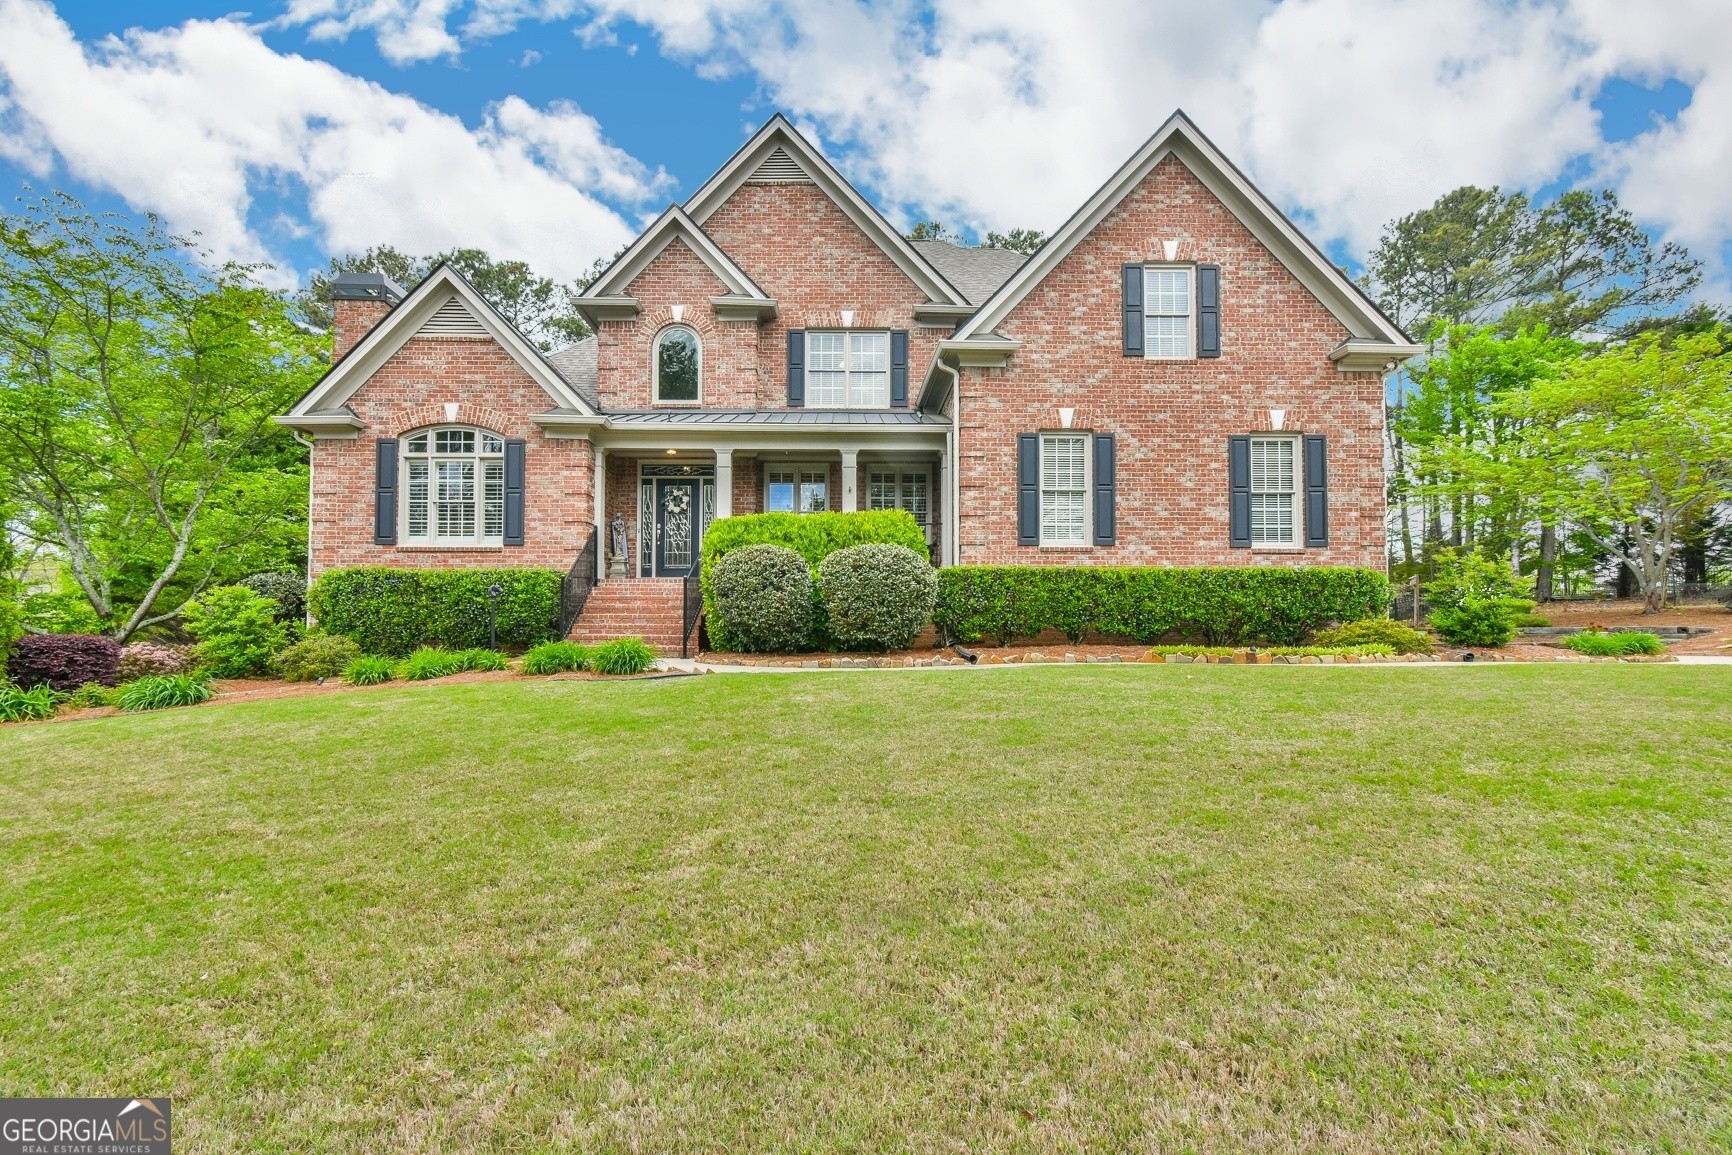 1. 3180 Mulberry Oaks Ct